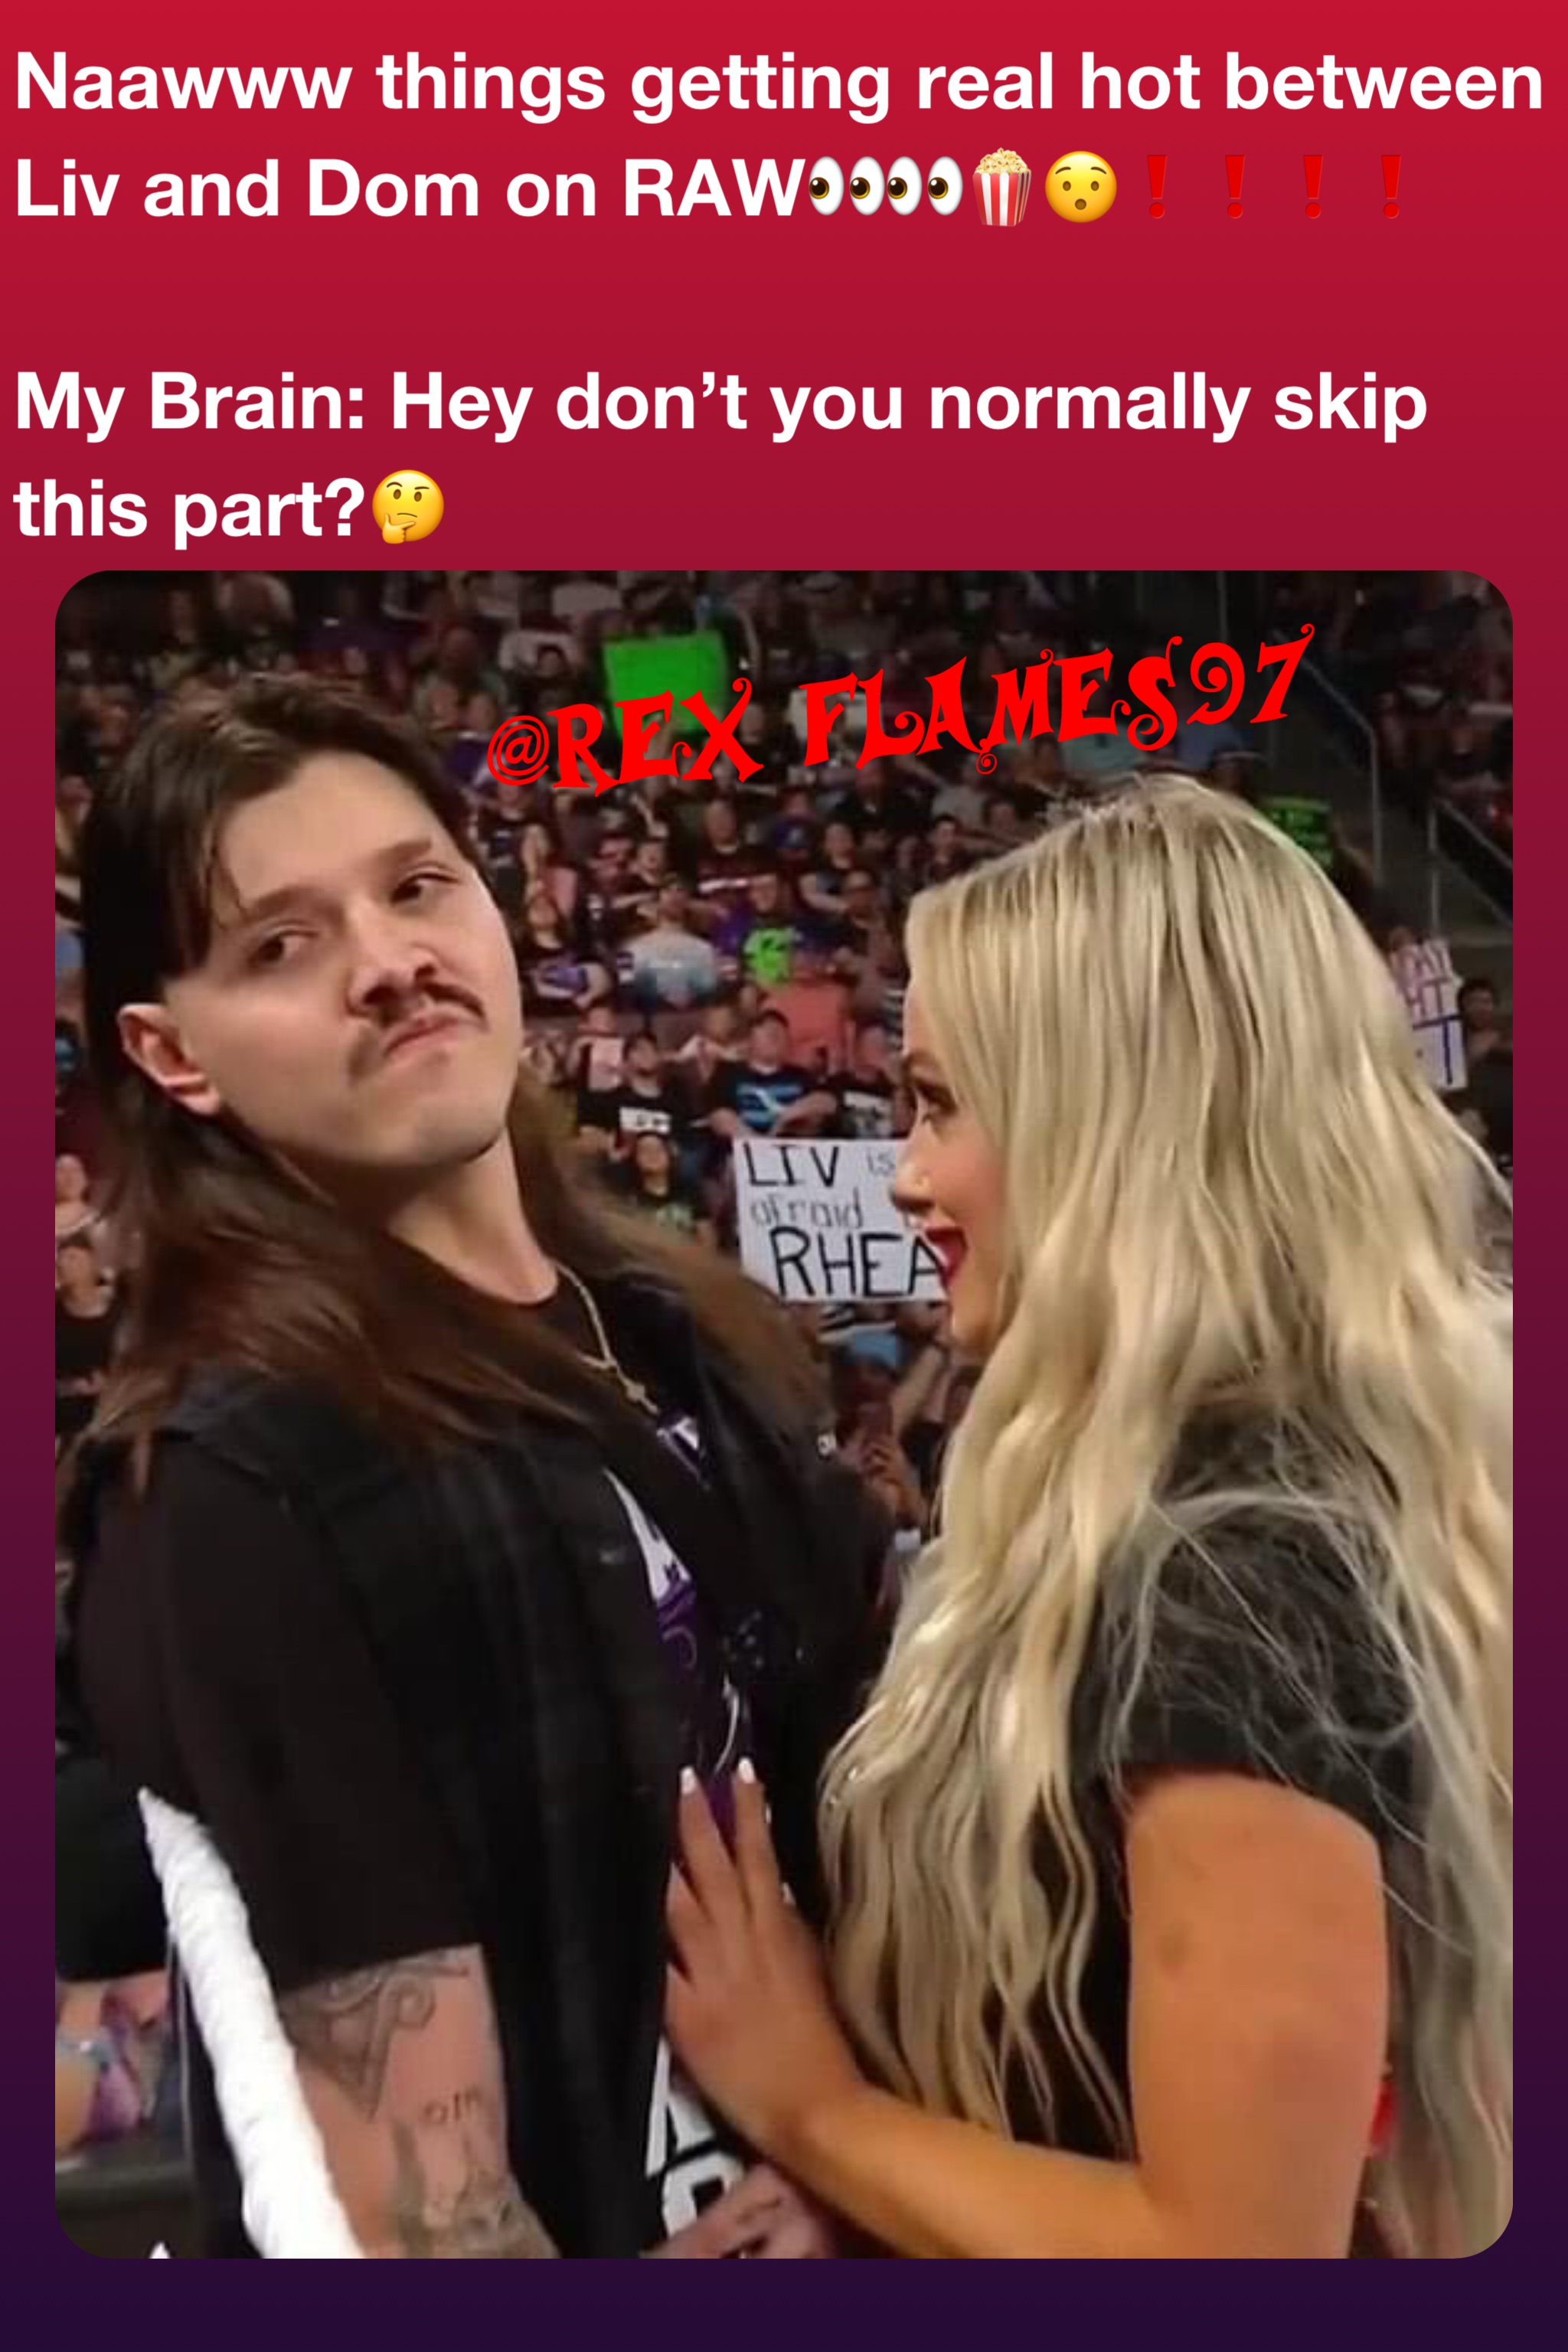 Naawww things getting real hot between Liv and Dom on RAW👀👀🍿😯❗️❗️❗️❗️

My Brain: Hey don’t you normally skip this part?🤔